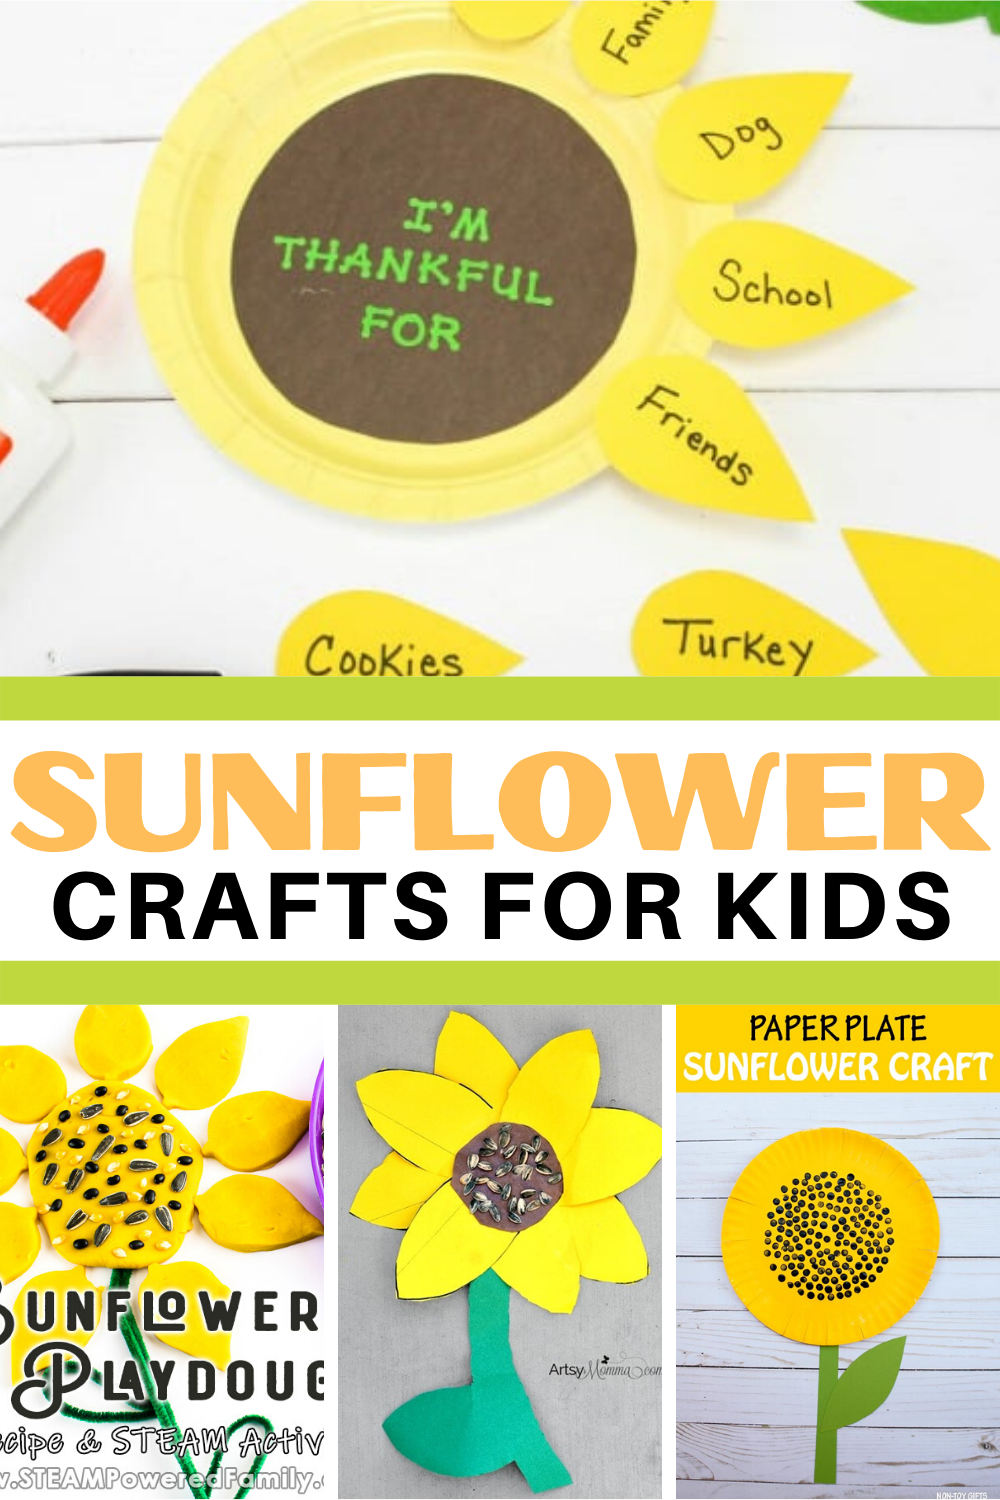 sunflower-crafts-2 Life Cycle of a Sunflower